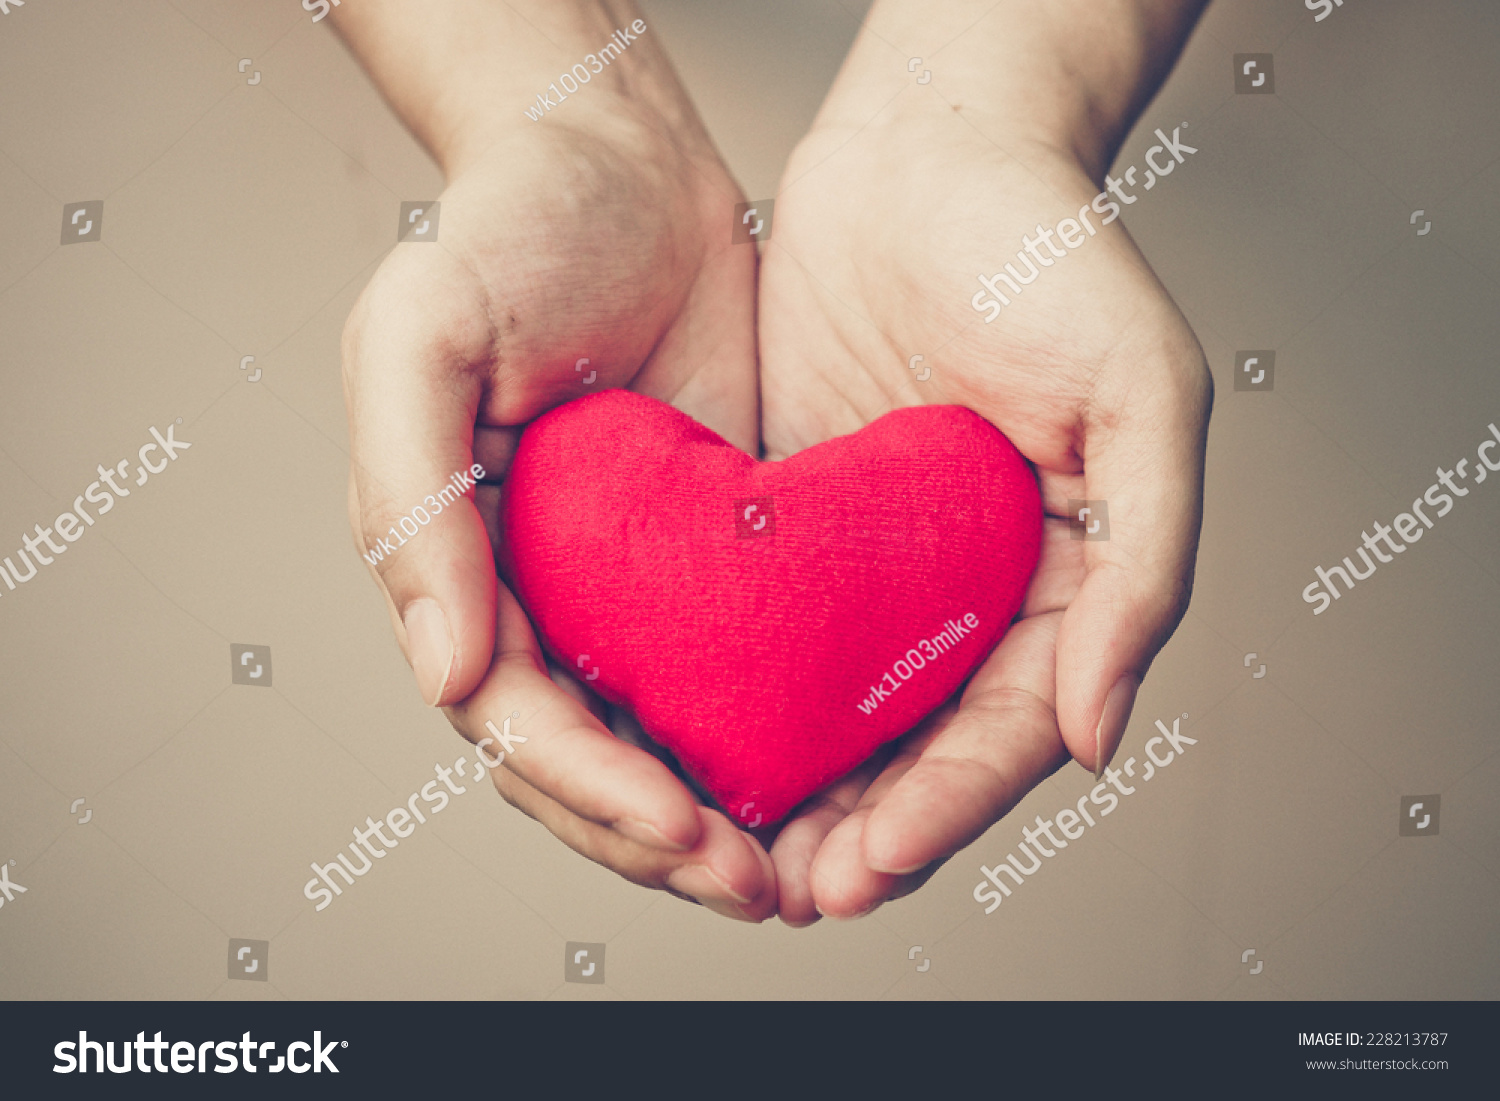 Hands Holding Red Heart Stock Photo (Edit Now) 228213787